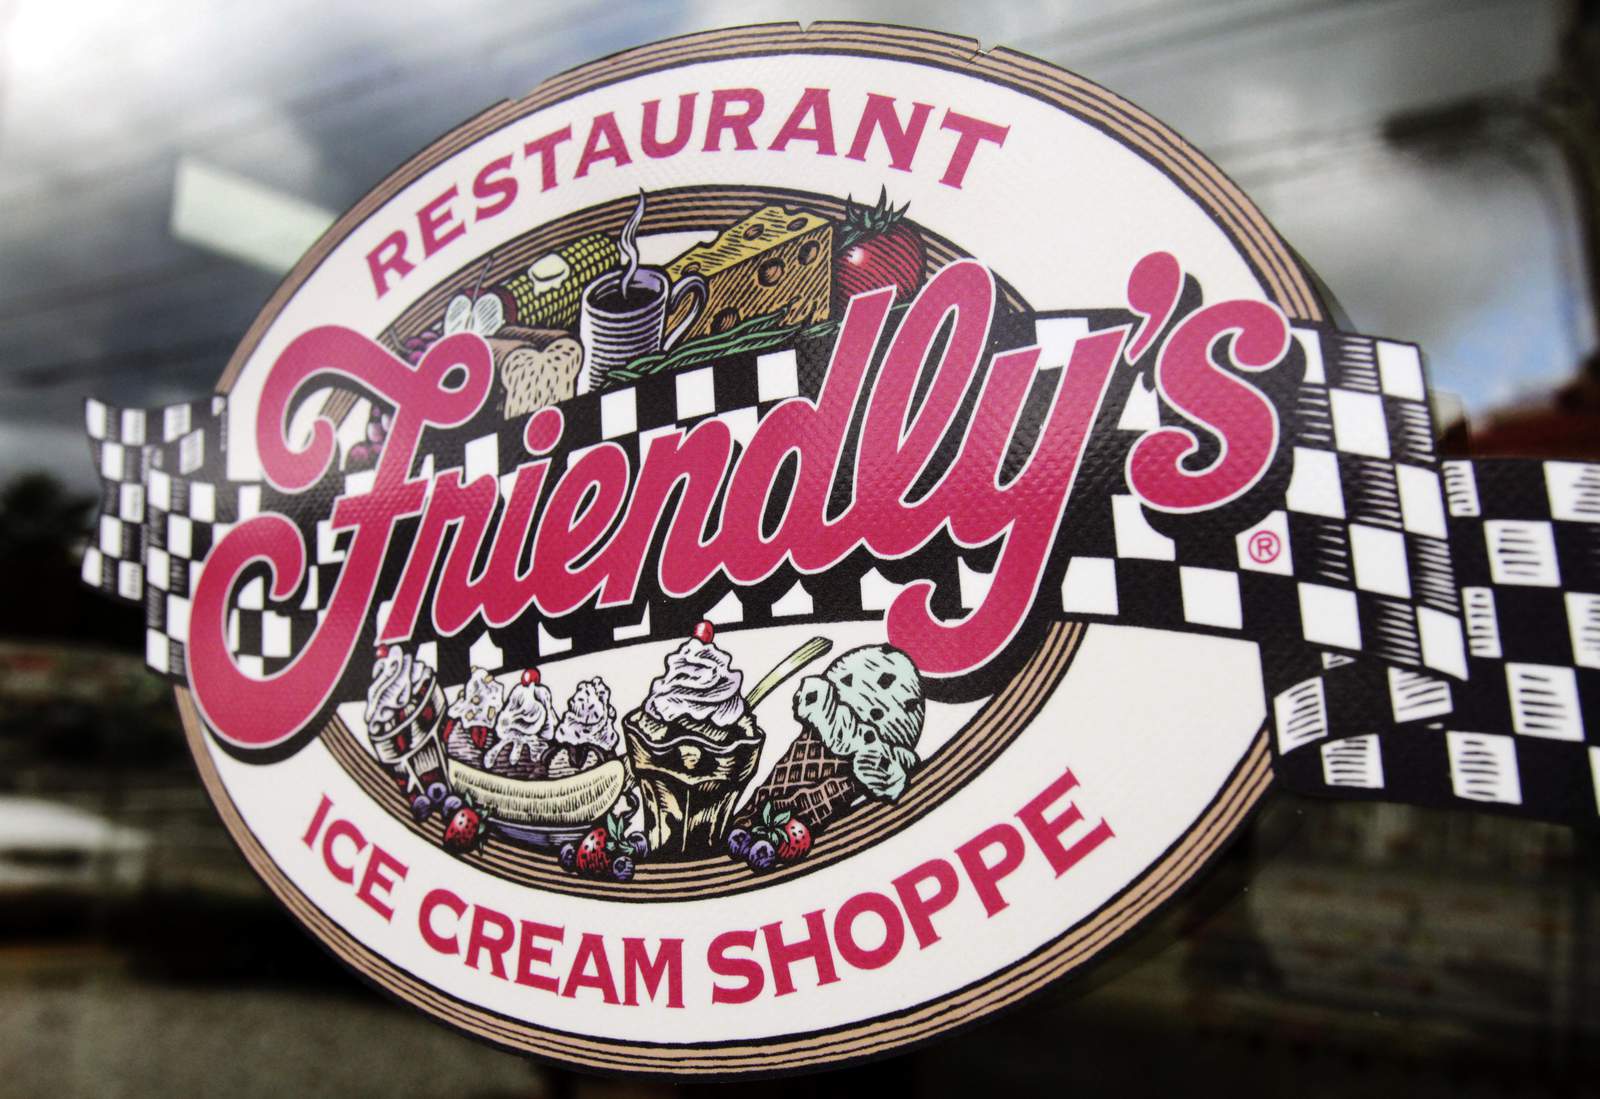 Another restaurant chain, Friendly's, hits wall in pandemic